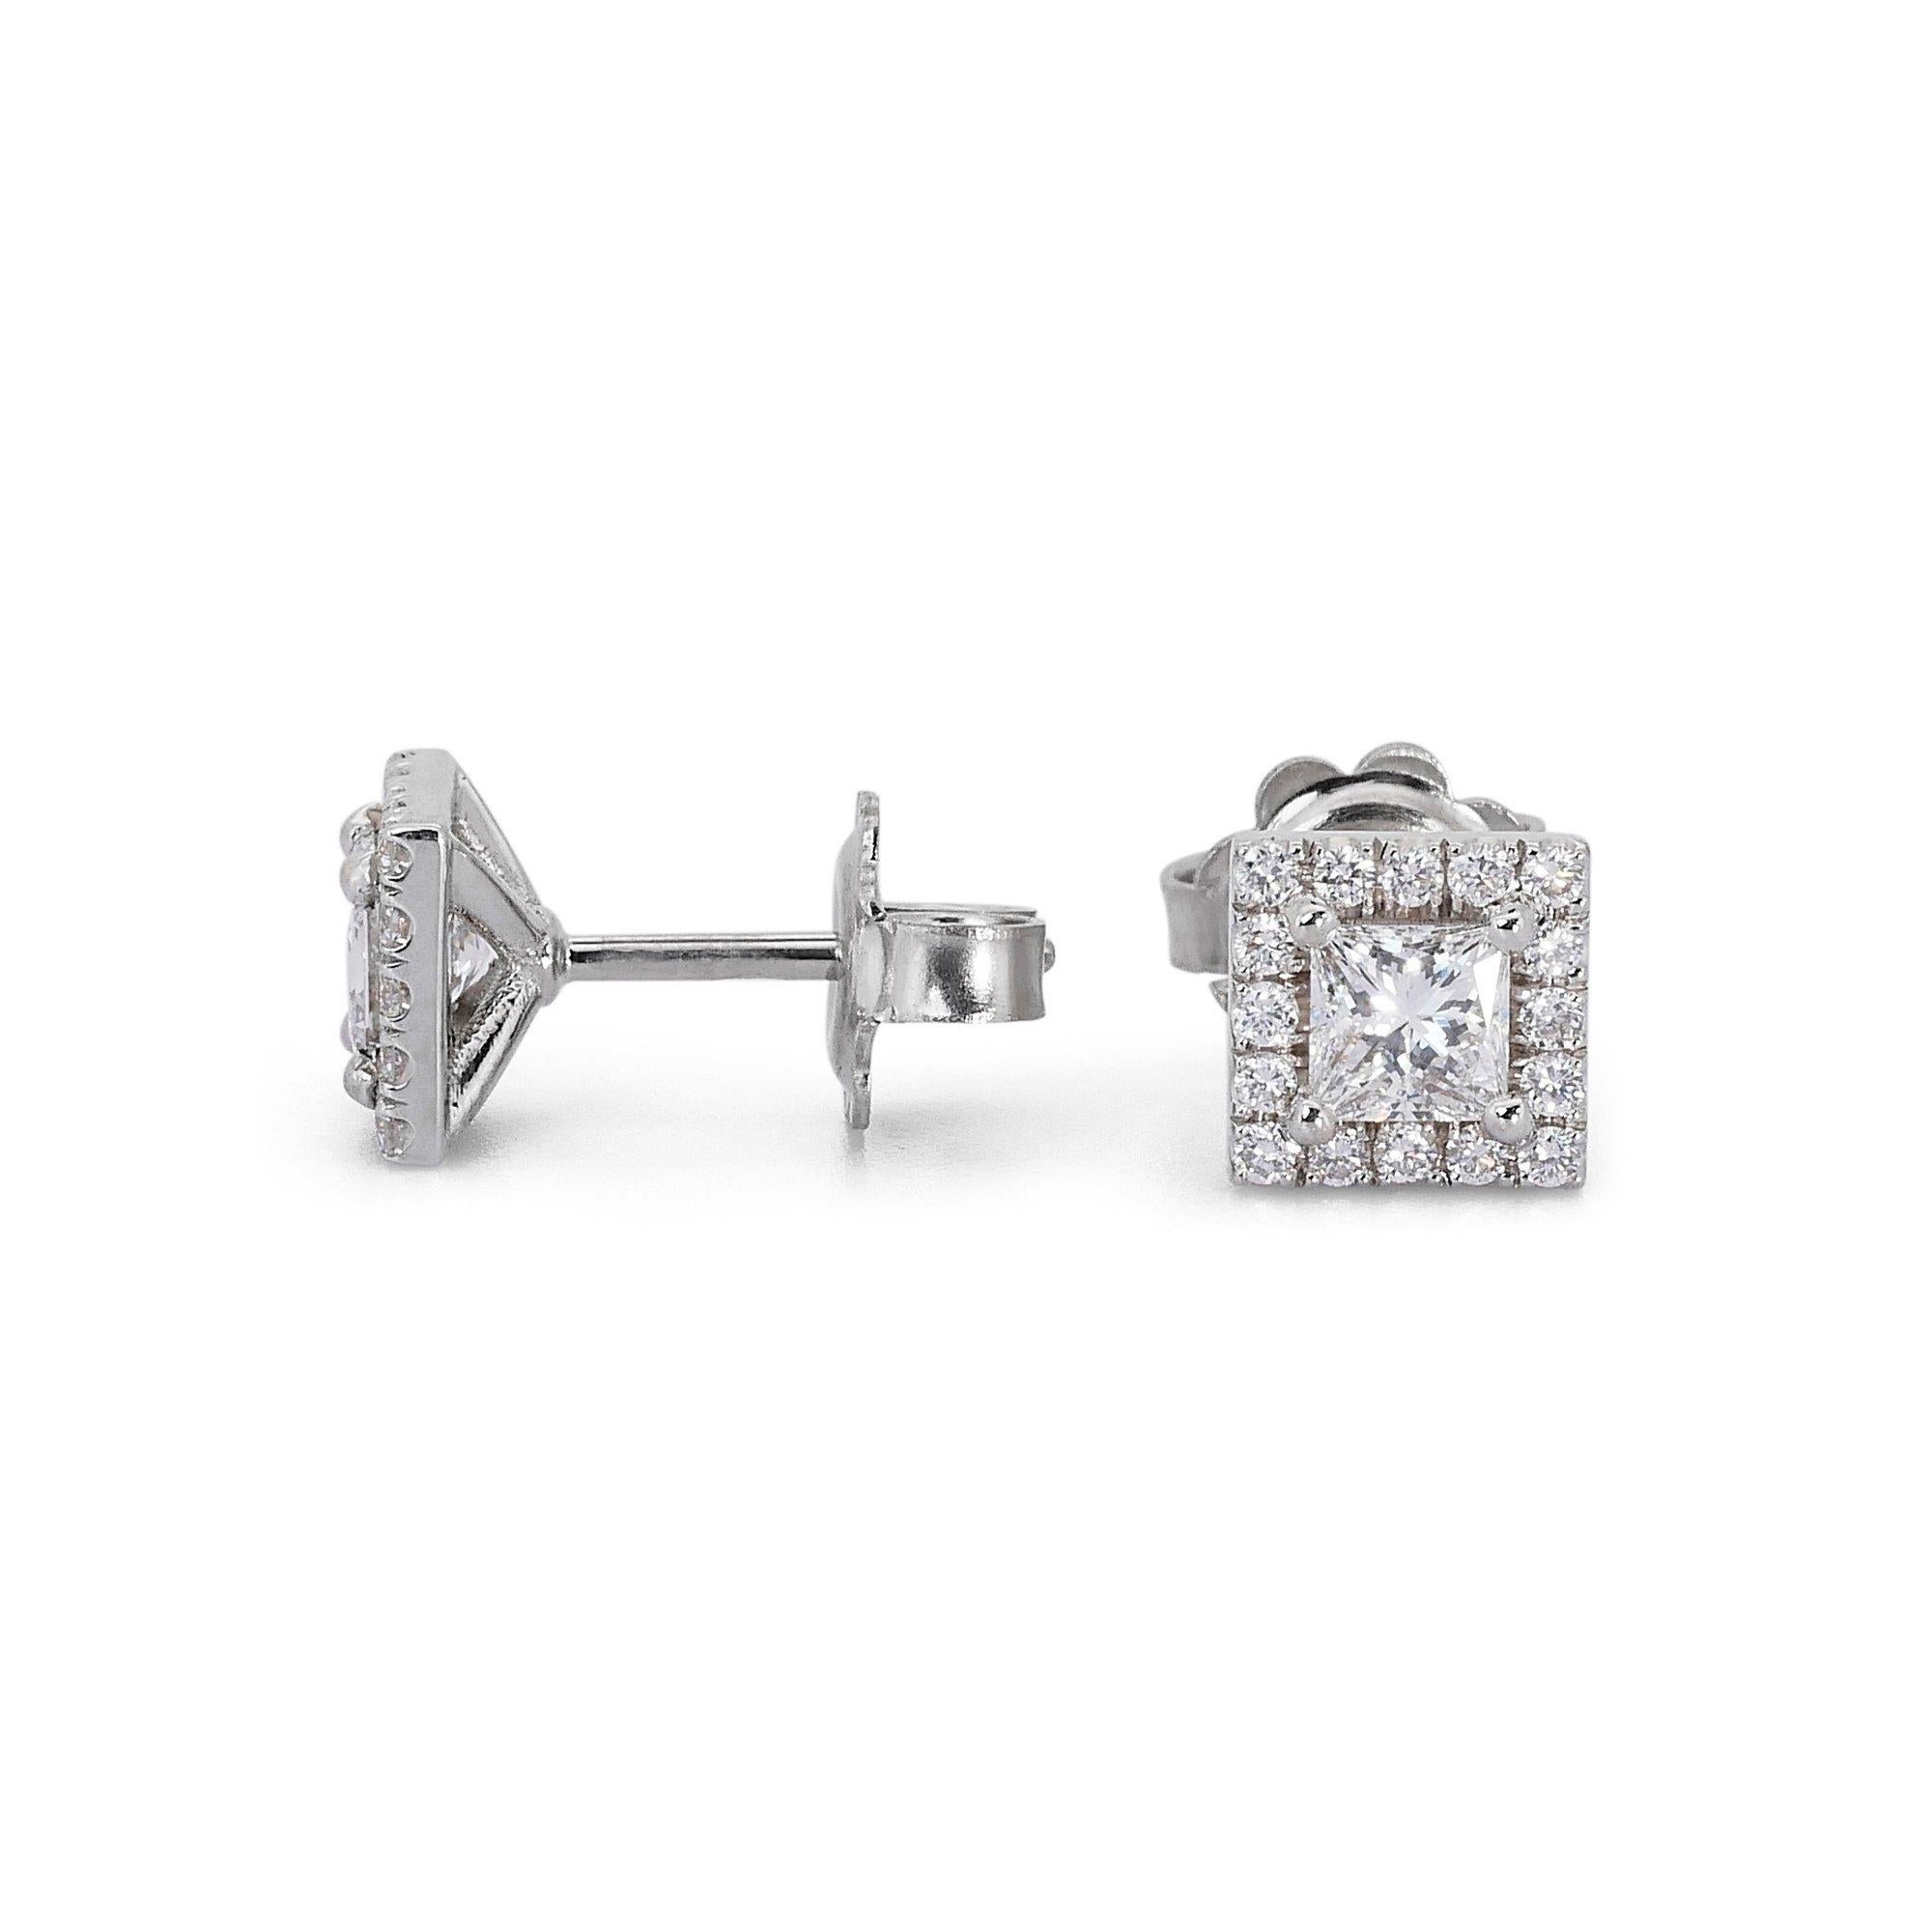 Brilliant Cut Enchanting 1.33ct Diamond Halo Stud Earrings in 18k White Gold - GIA Certified  For Sale